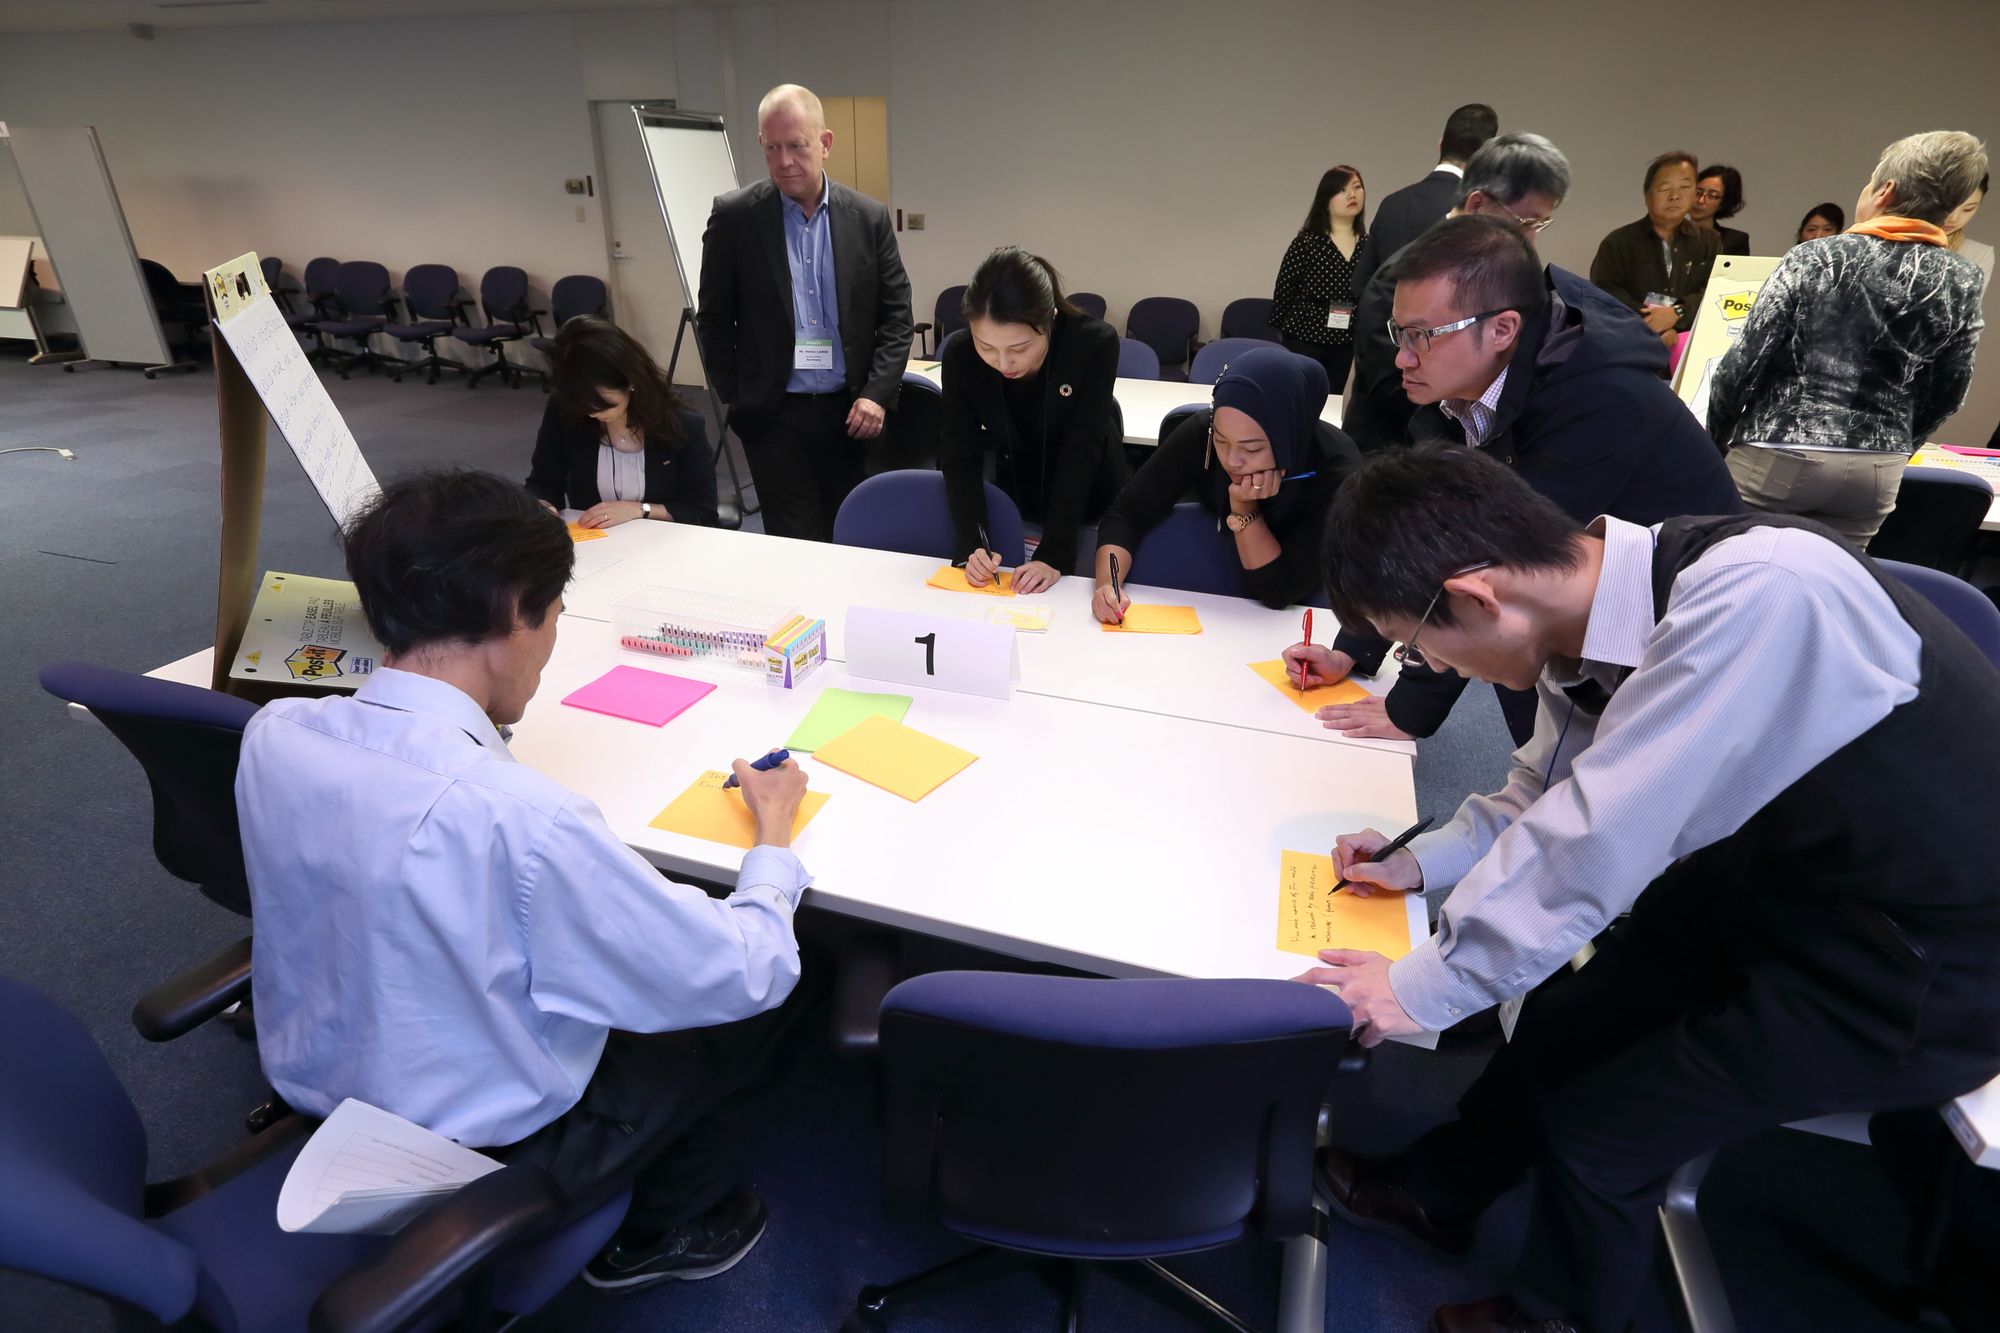 In the course of session 6, the participants discussed in small working groups how to address FW prevention in the food service sector in East and Southeast Asia.